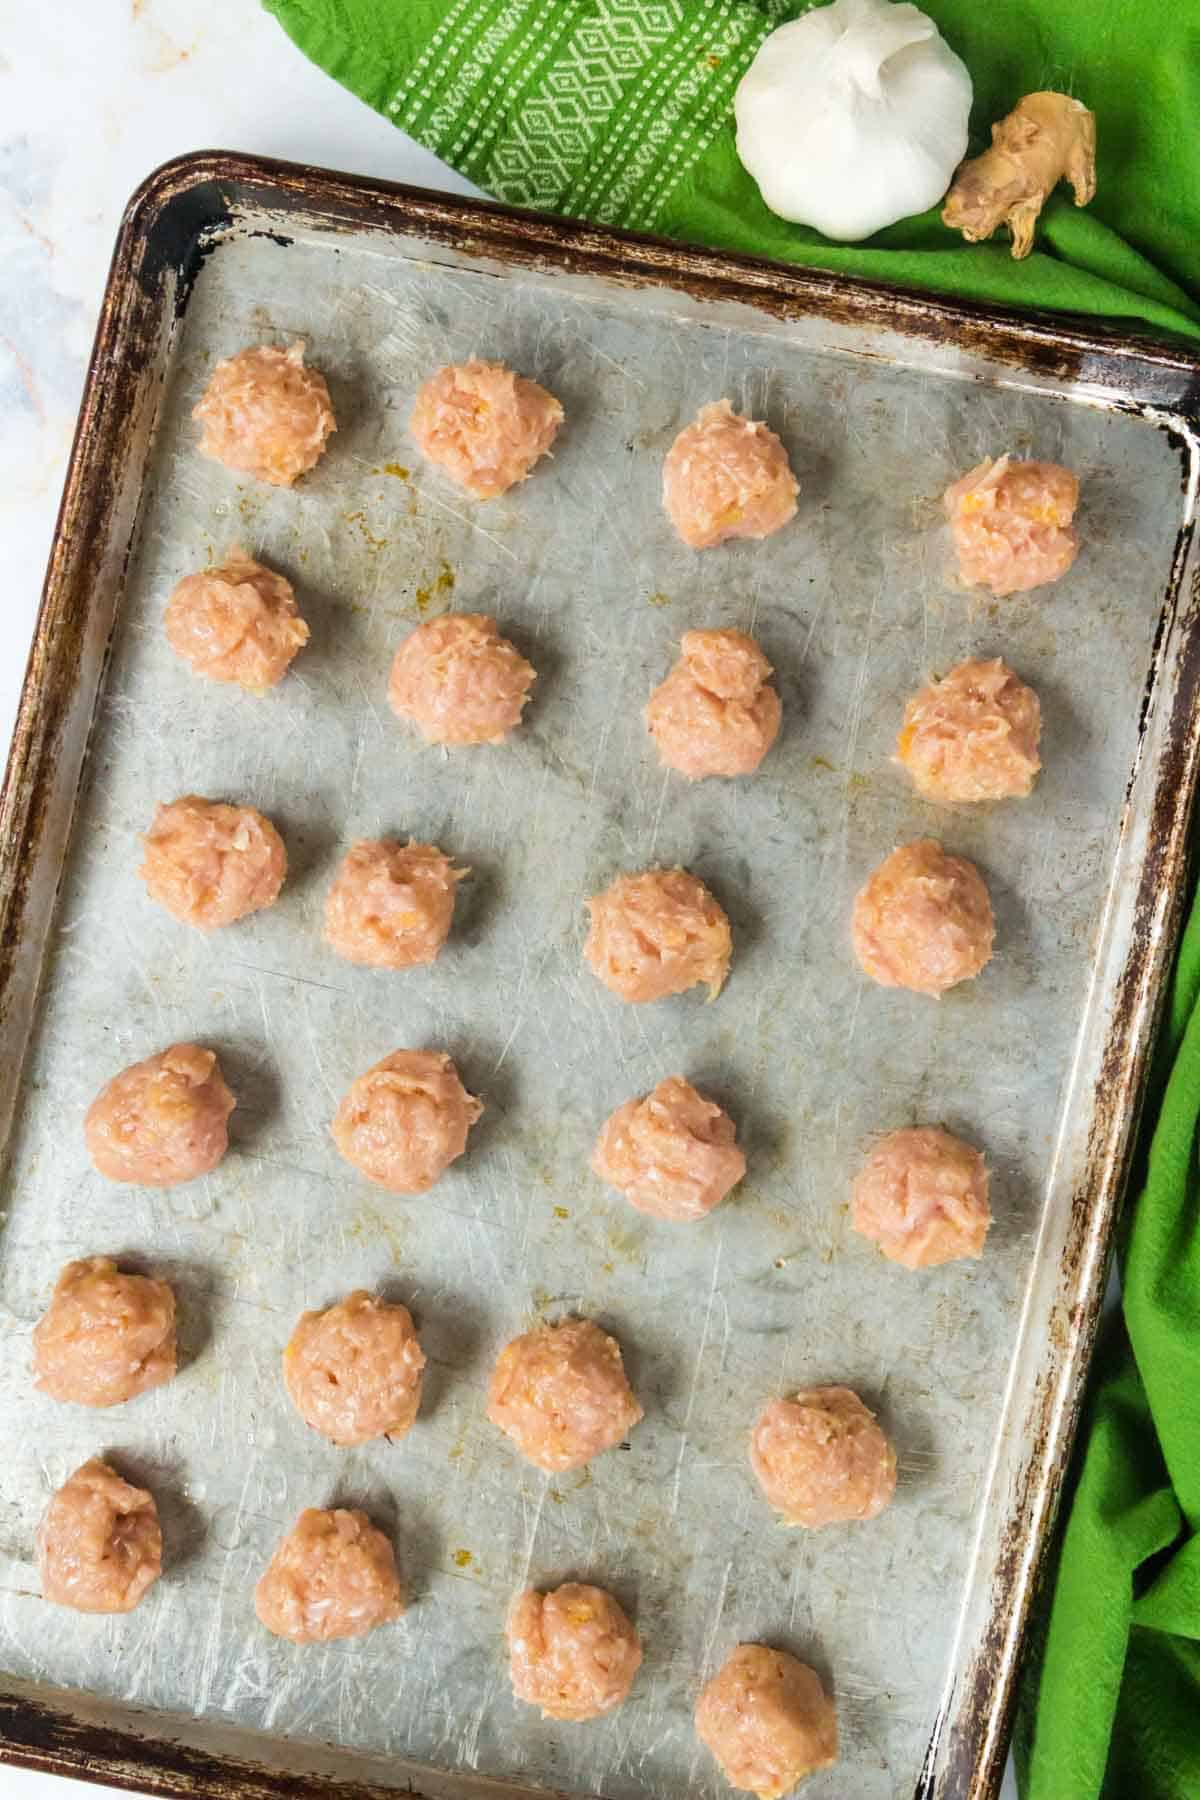 Rolled chicken meatballs laid out on a baking sheet.